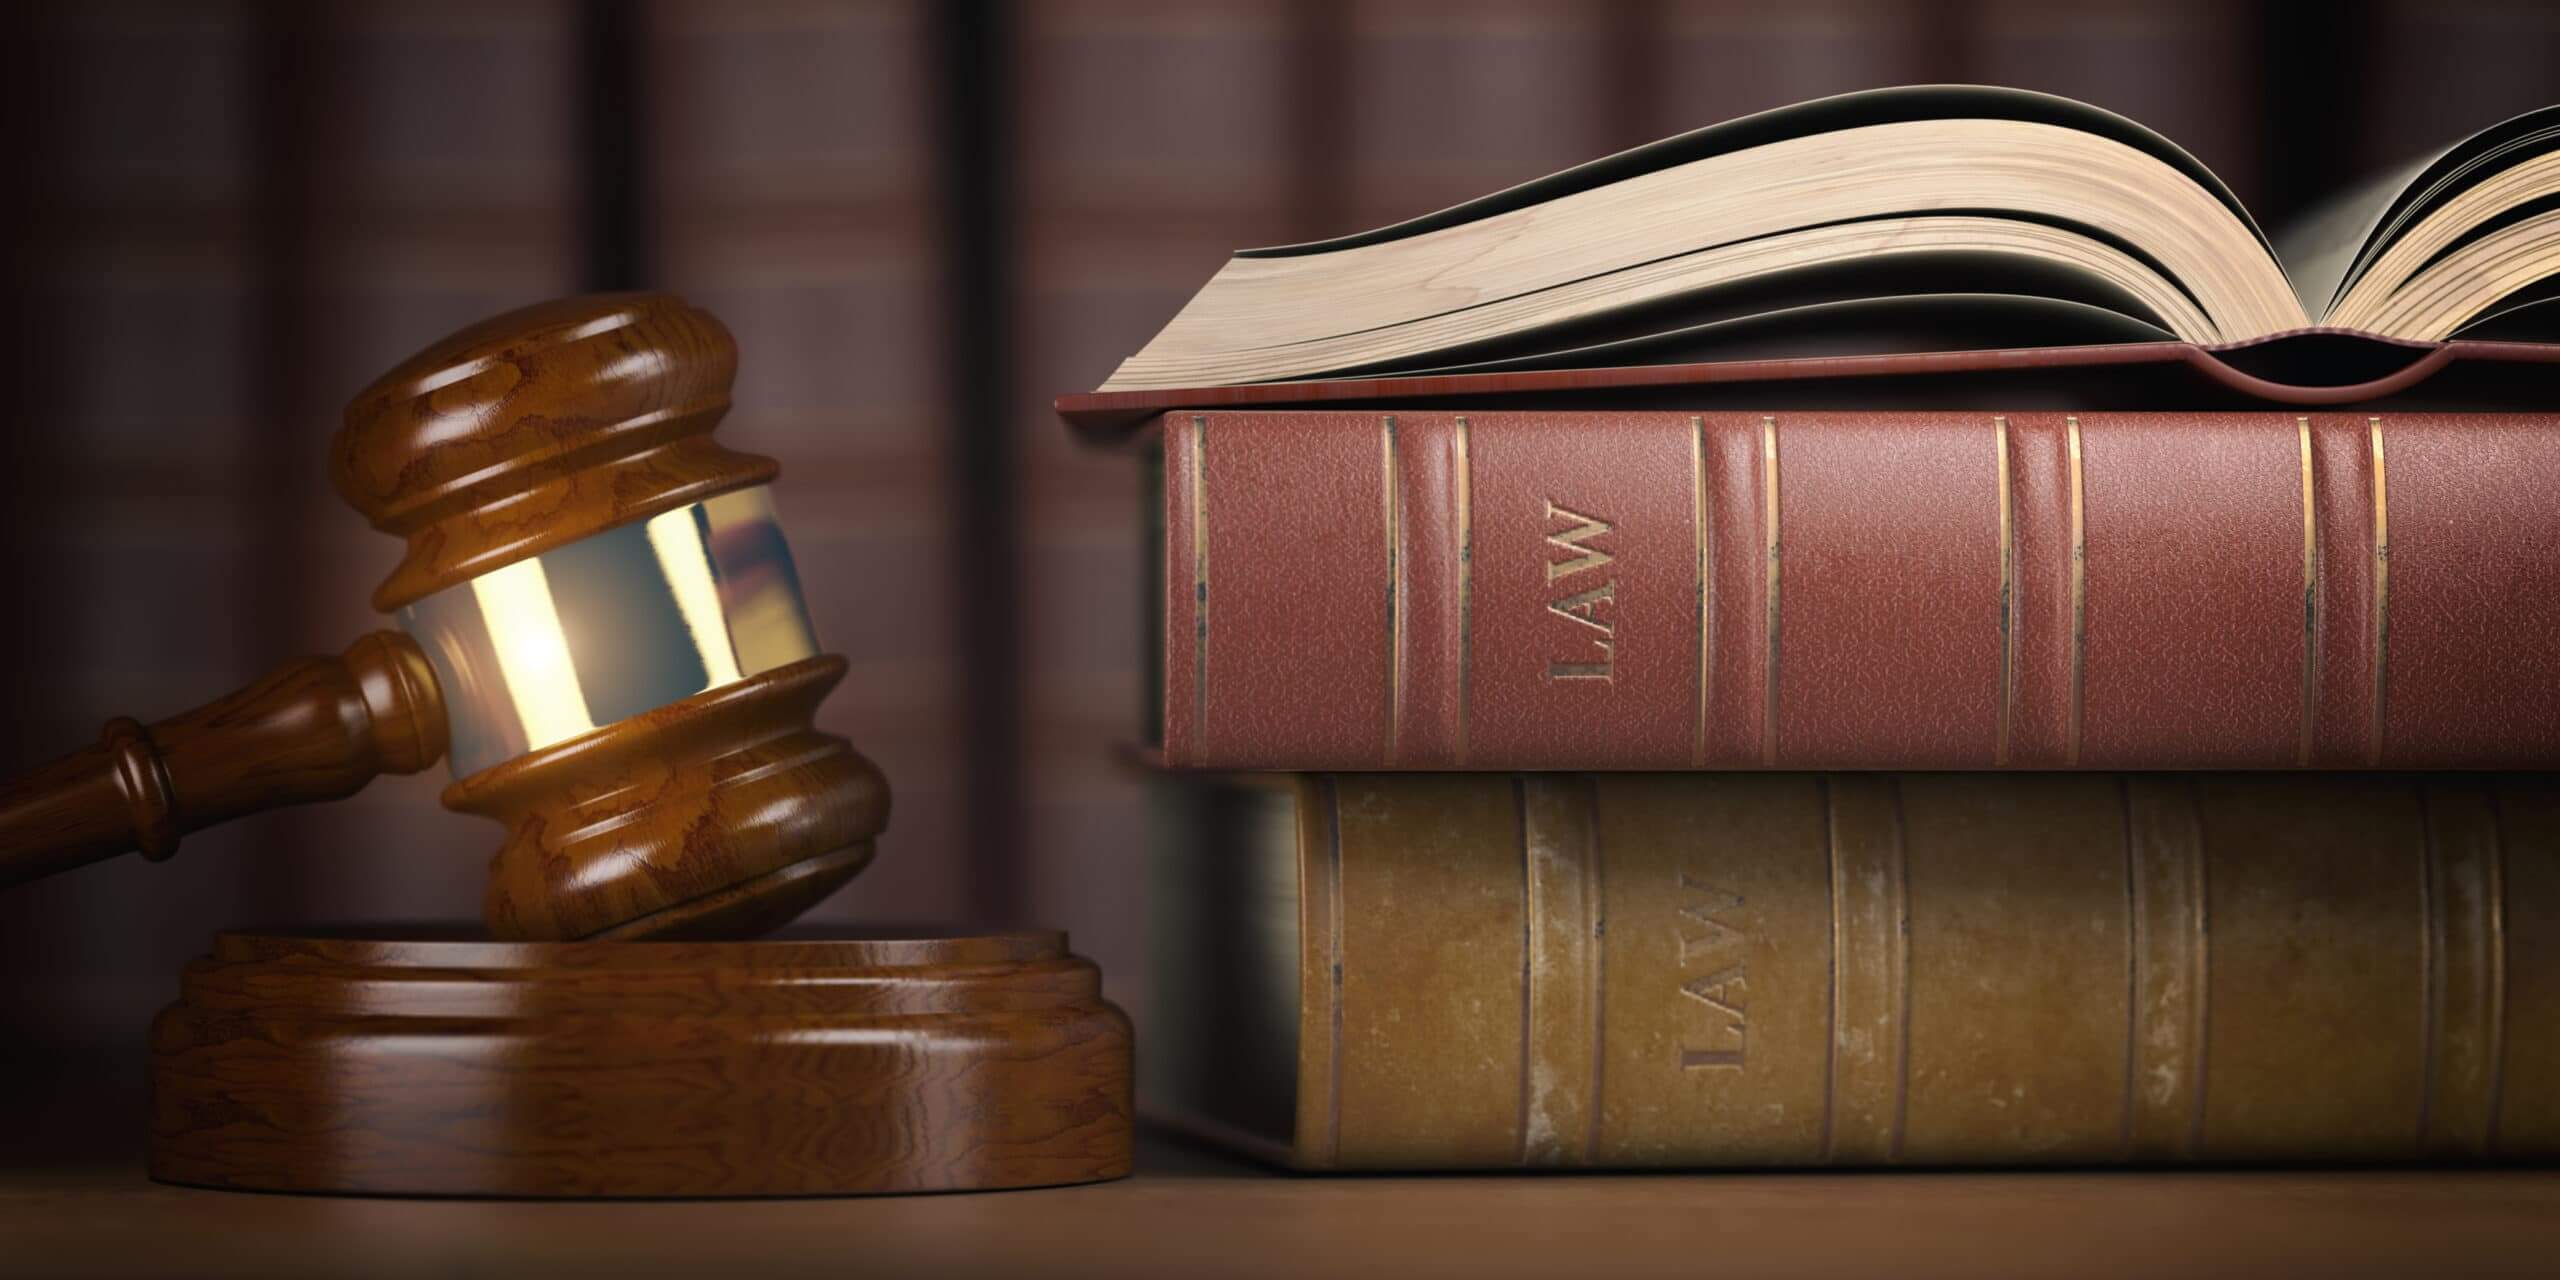 What is a wrongful death lawsuit?